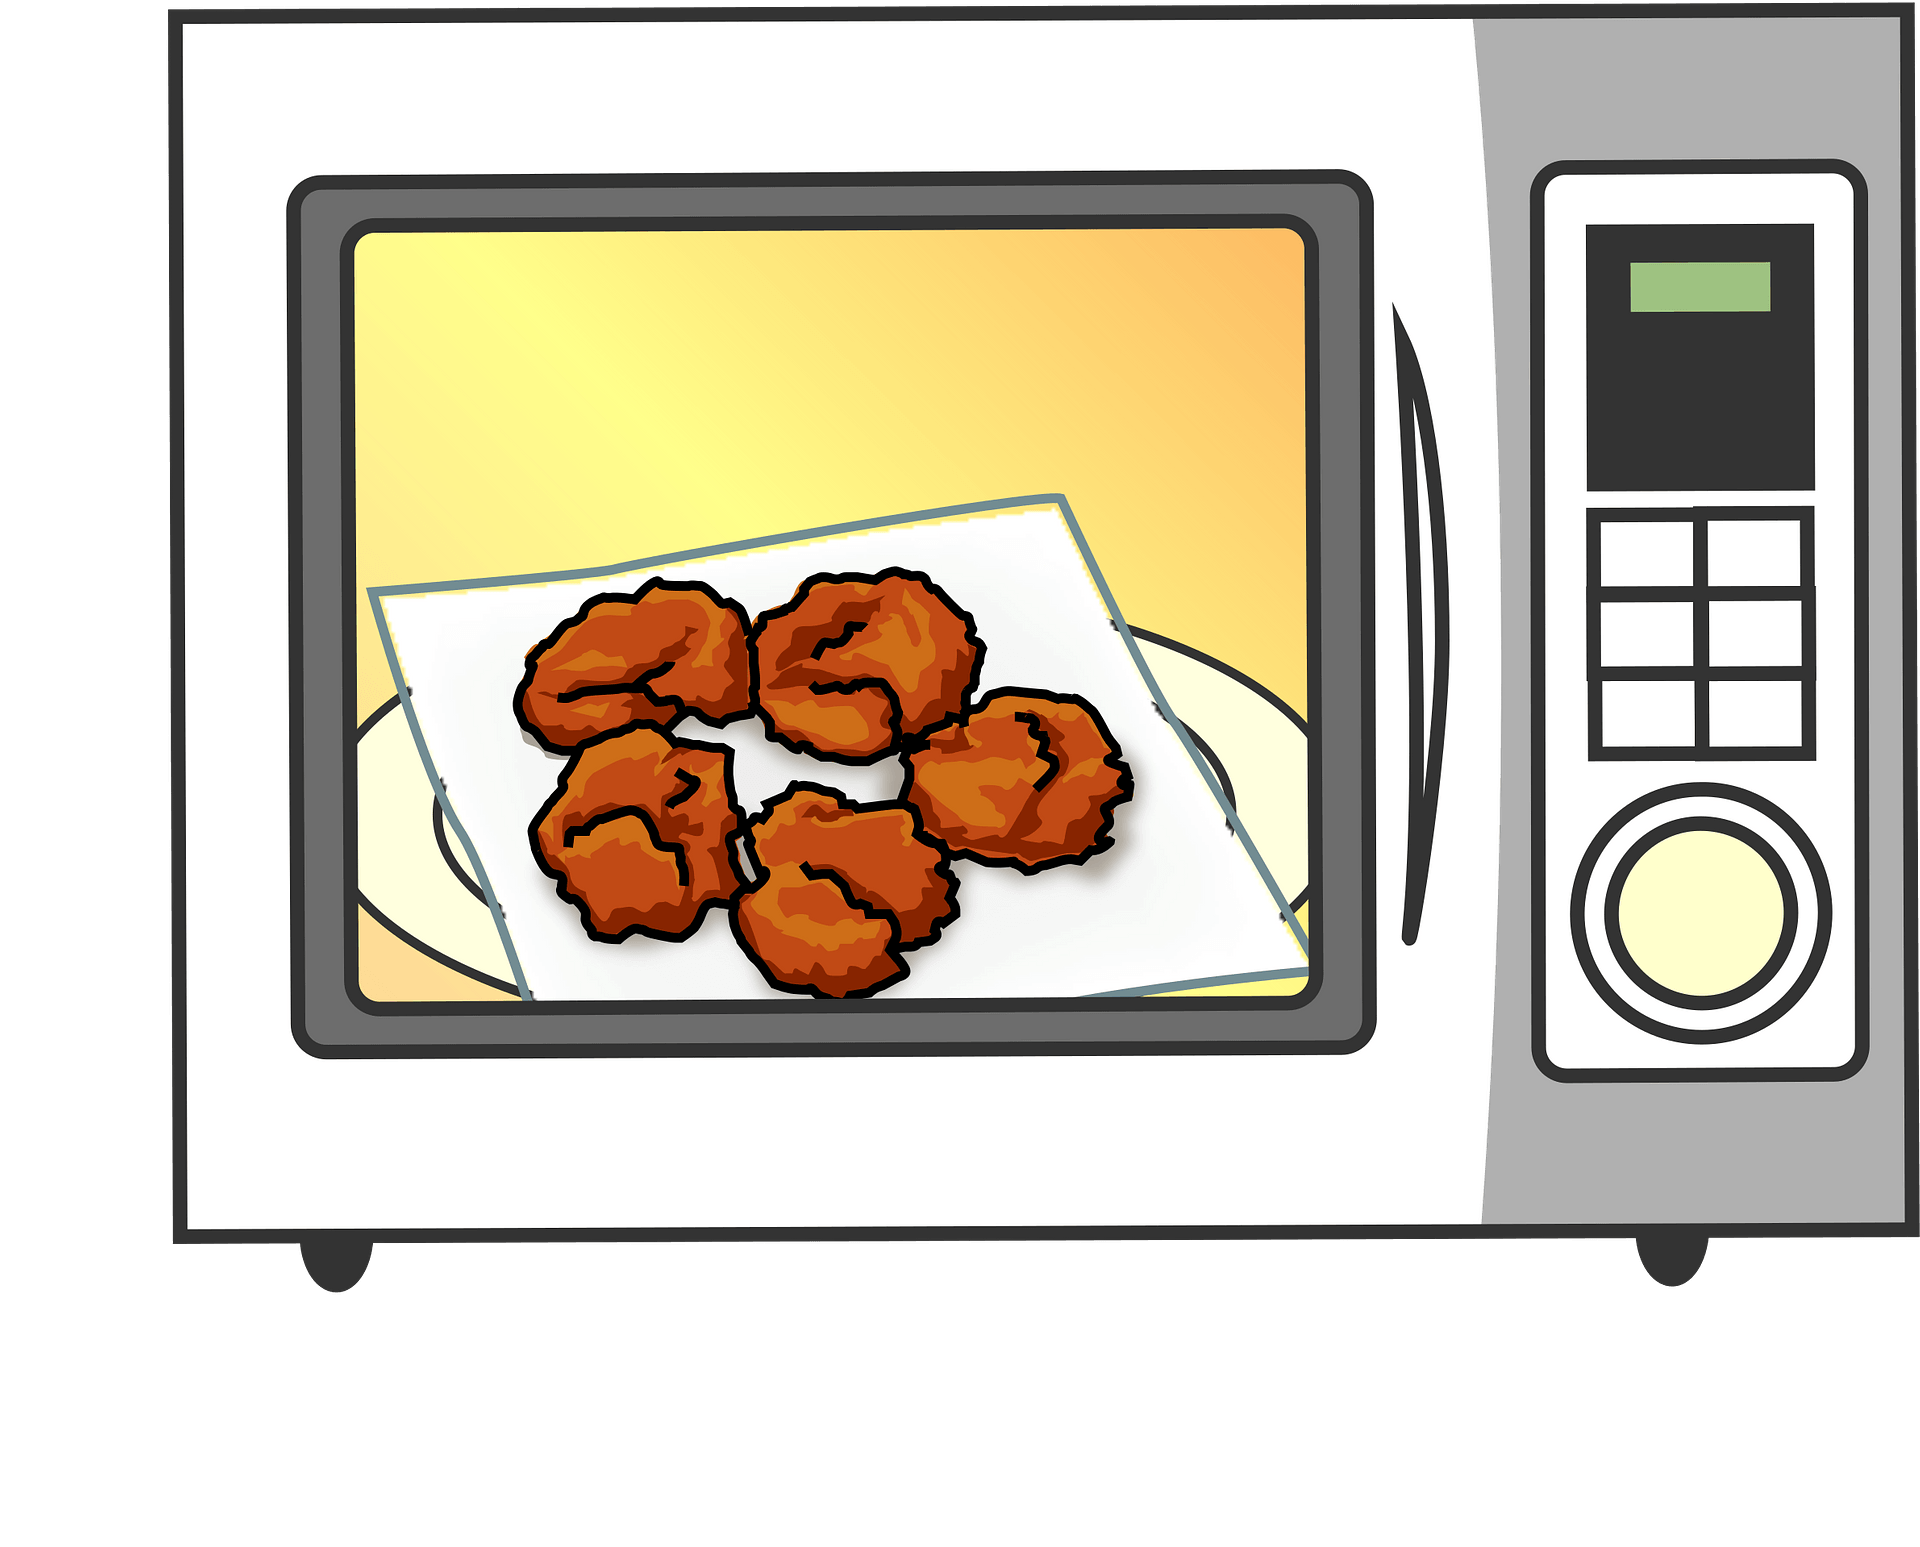 Microwave Oven PNG